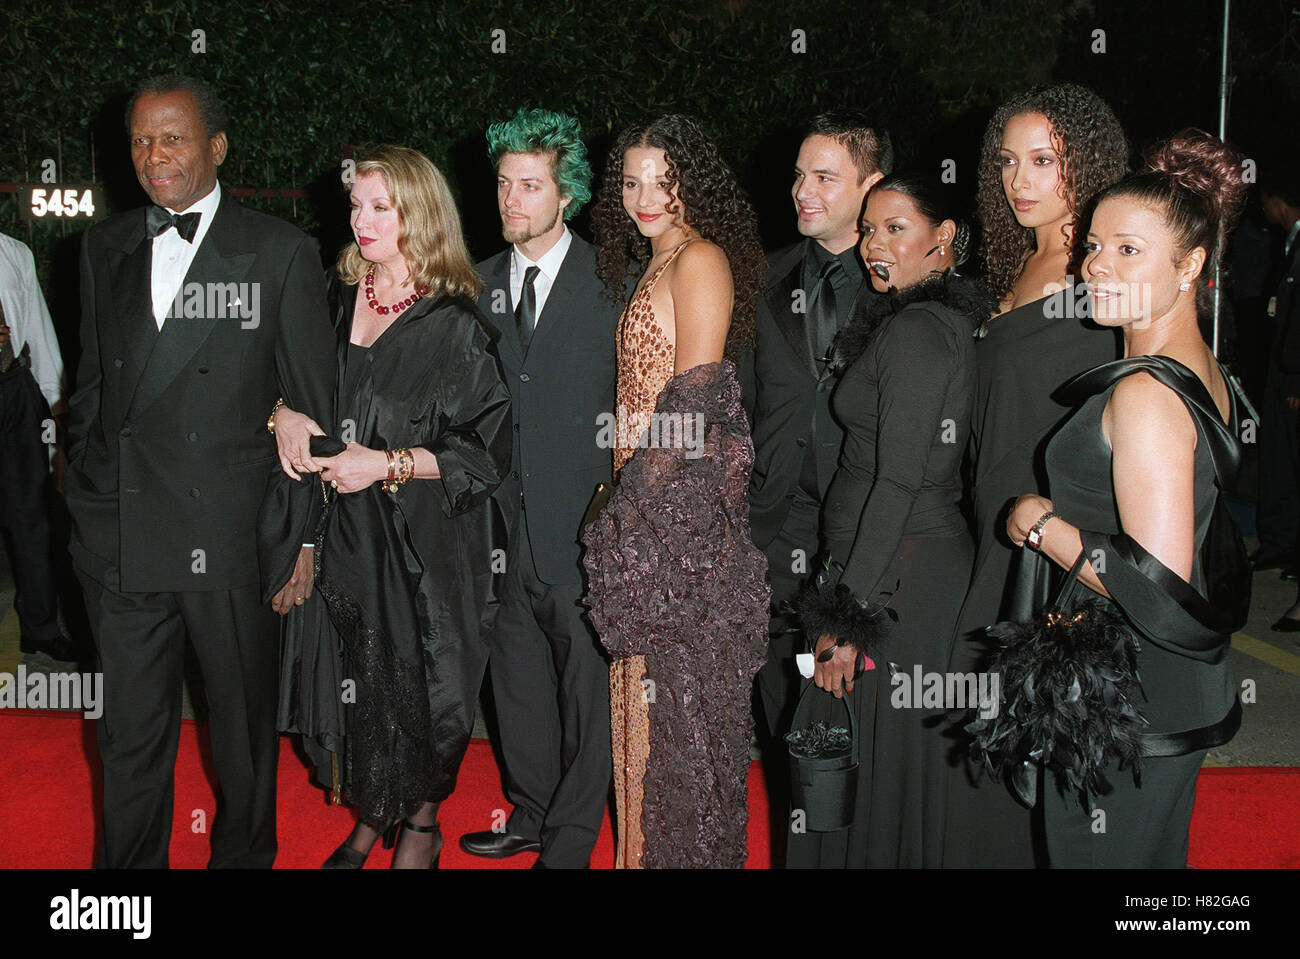 sidney-poitier-family-32nd-naacp-image-awards-arrivals-universal-amphitheatre-H82GAG.jpg